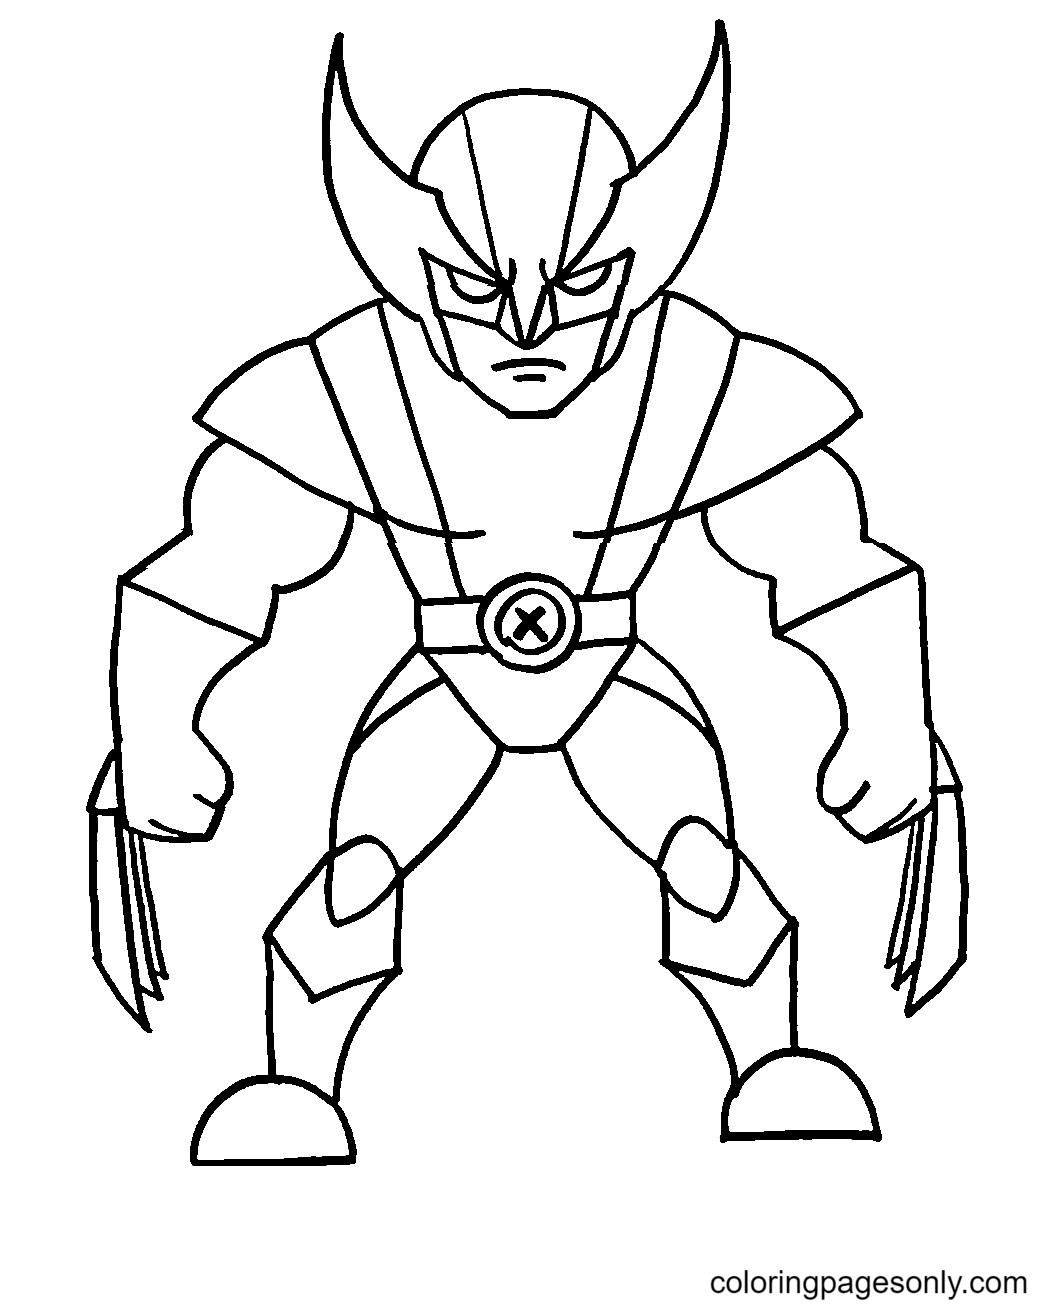 Wolverine in Fortnite Coloring Page